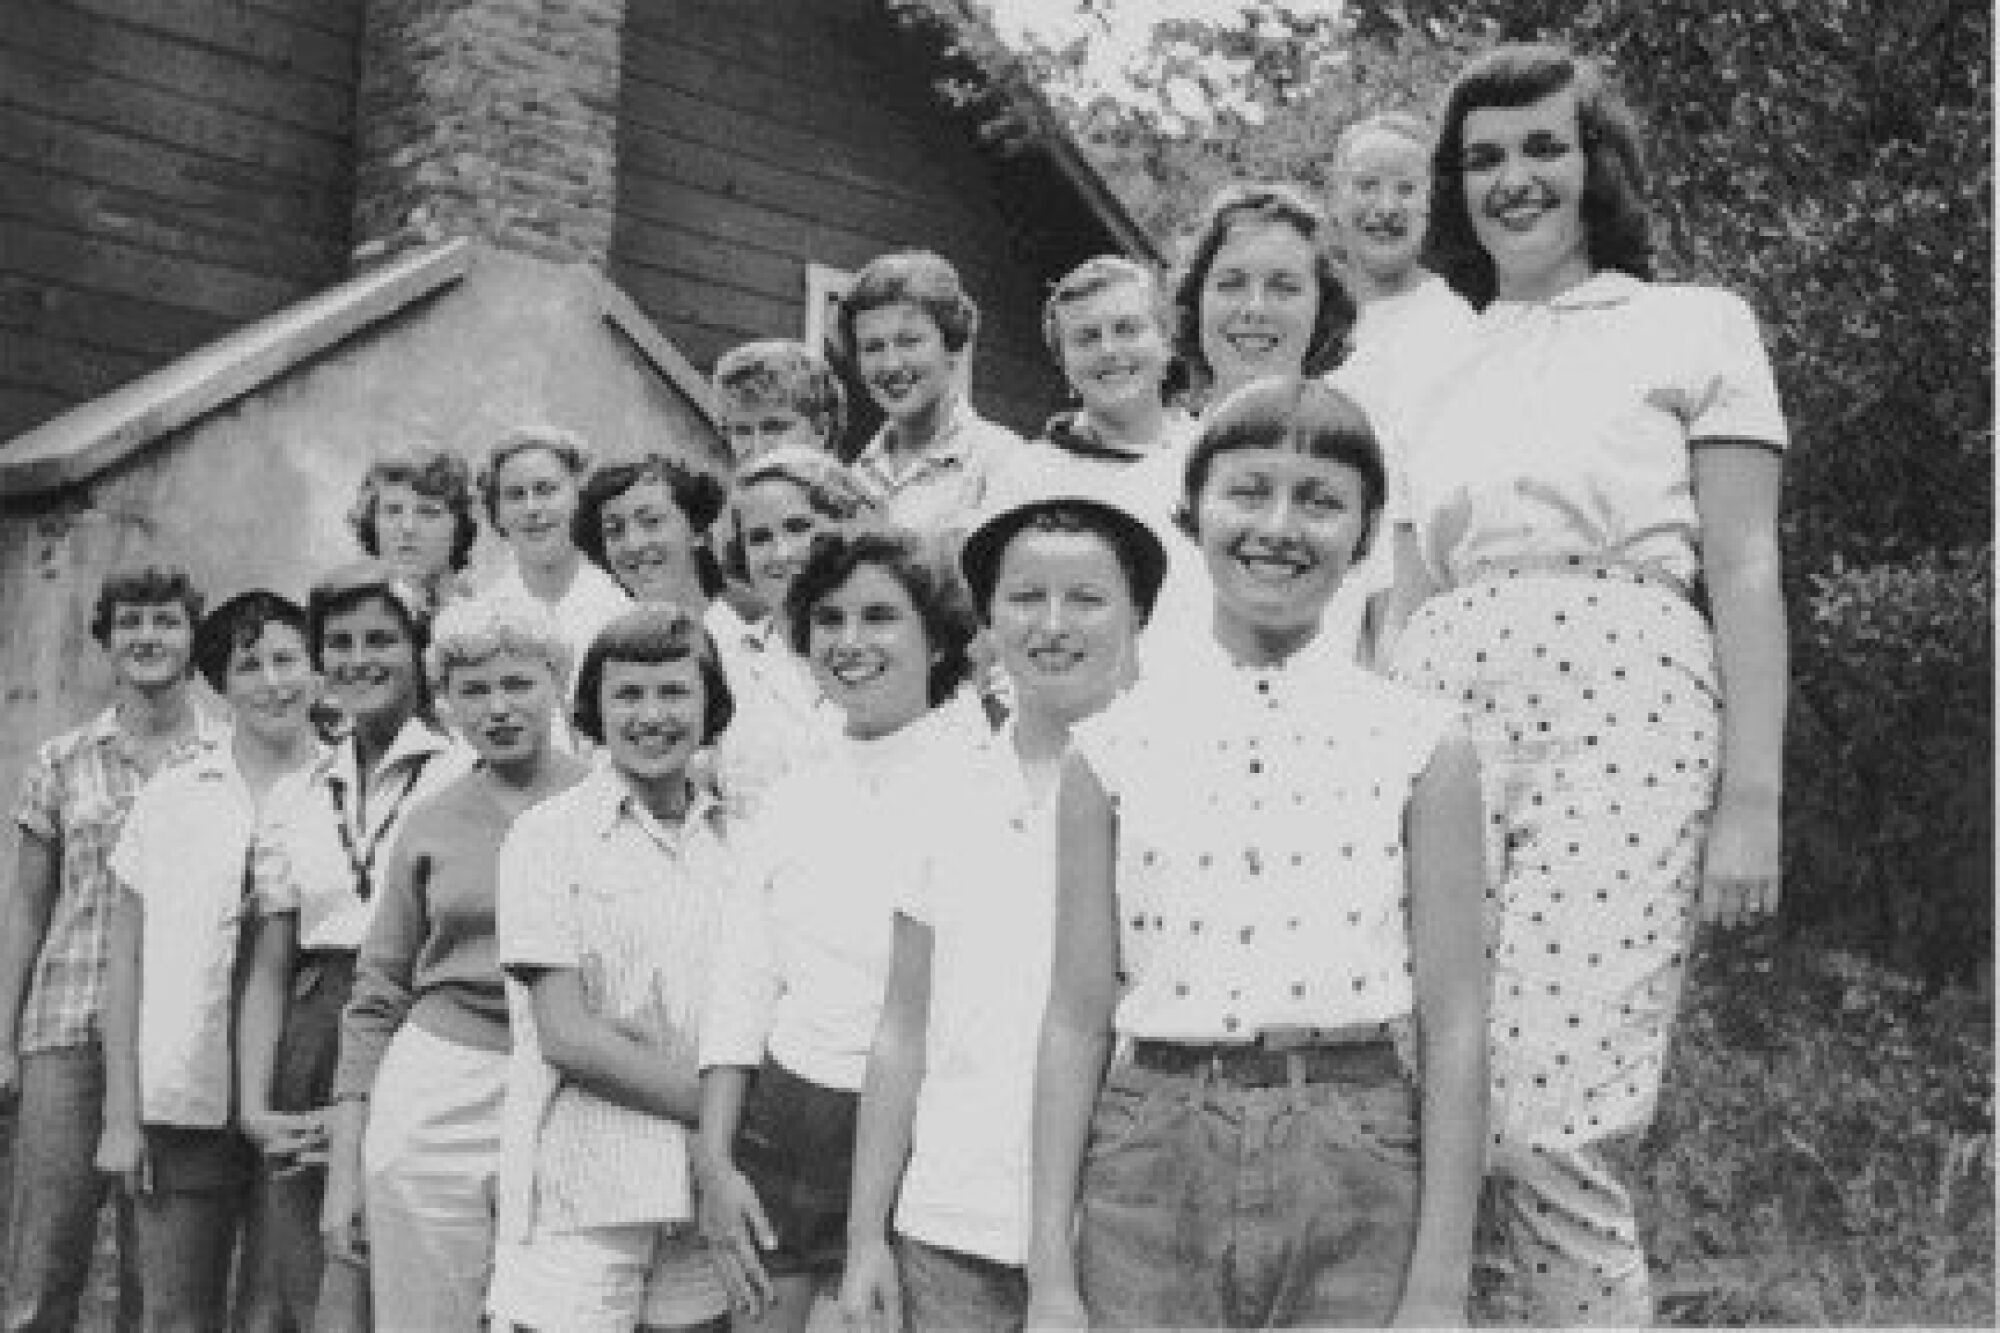 In 1960, the YMCA introduced girls camps at Camp Marston.